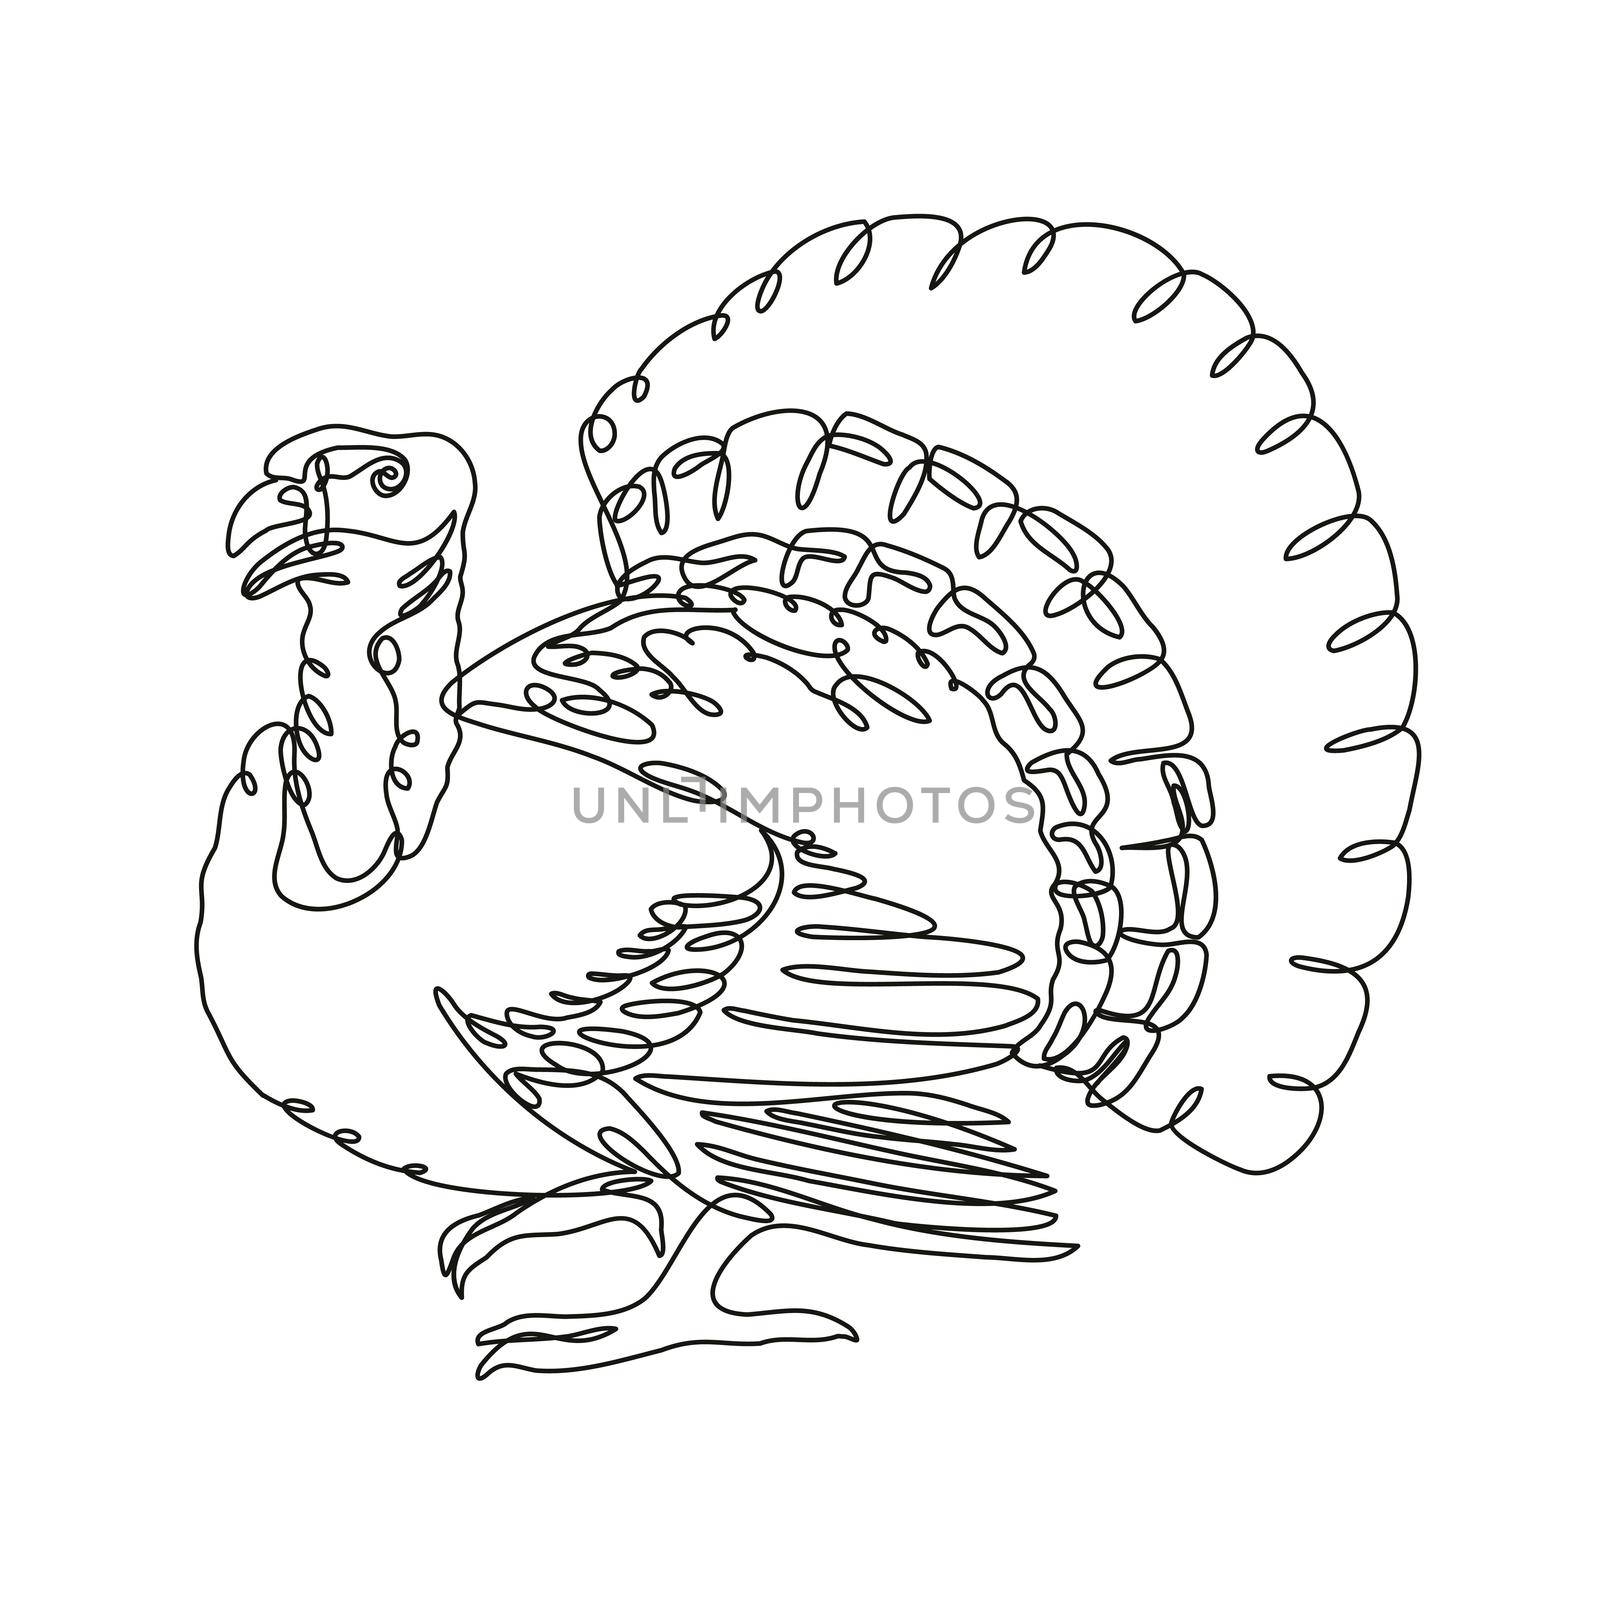 Continuous line drawing illustration of a wild turkey or domestic turkey viewed from side done in mono line or doodle style in black and white on isolated background. 
